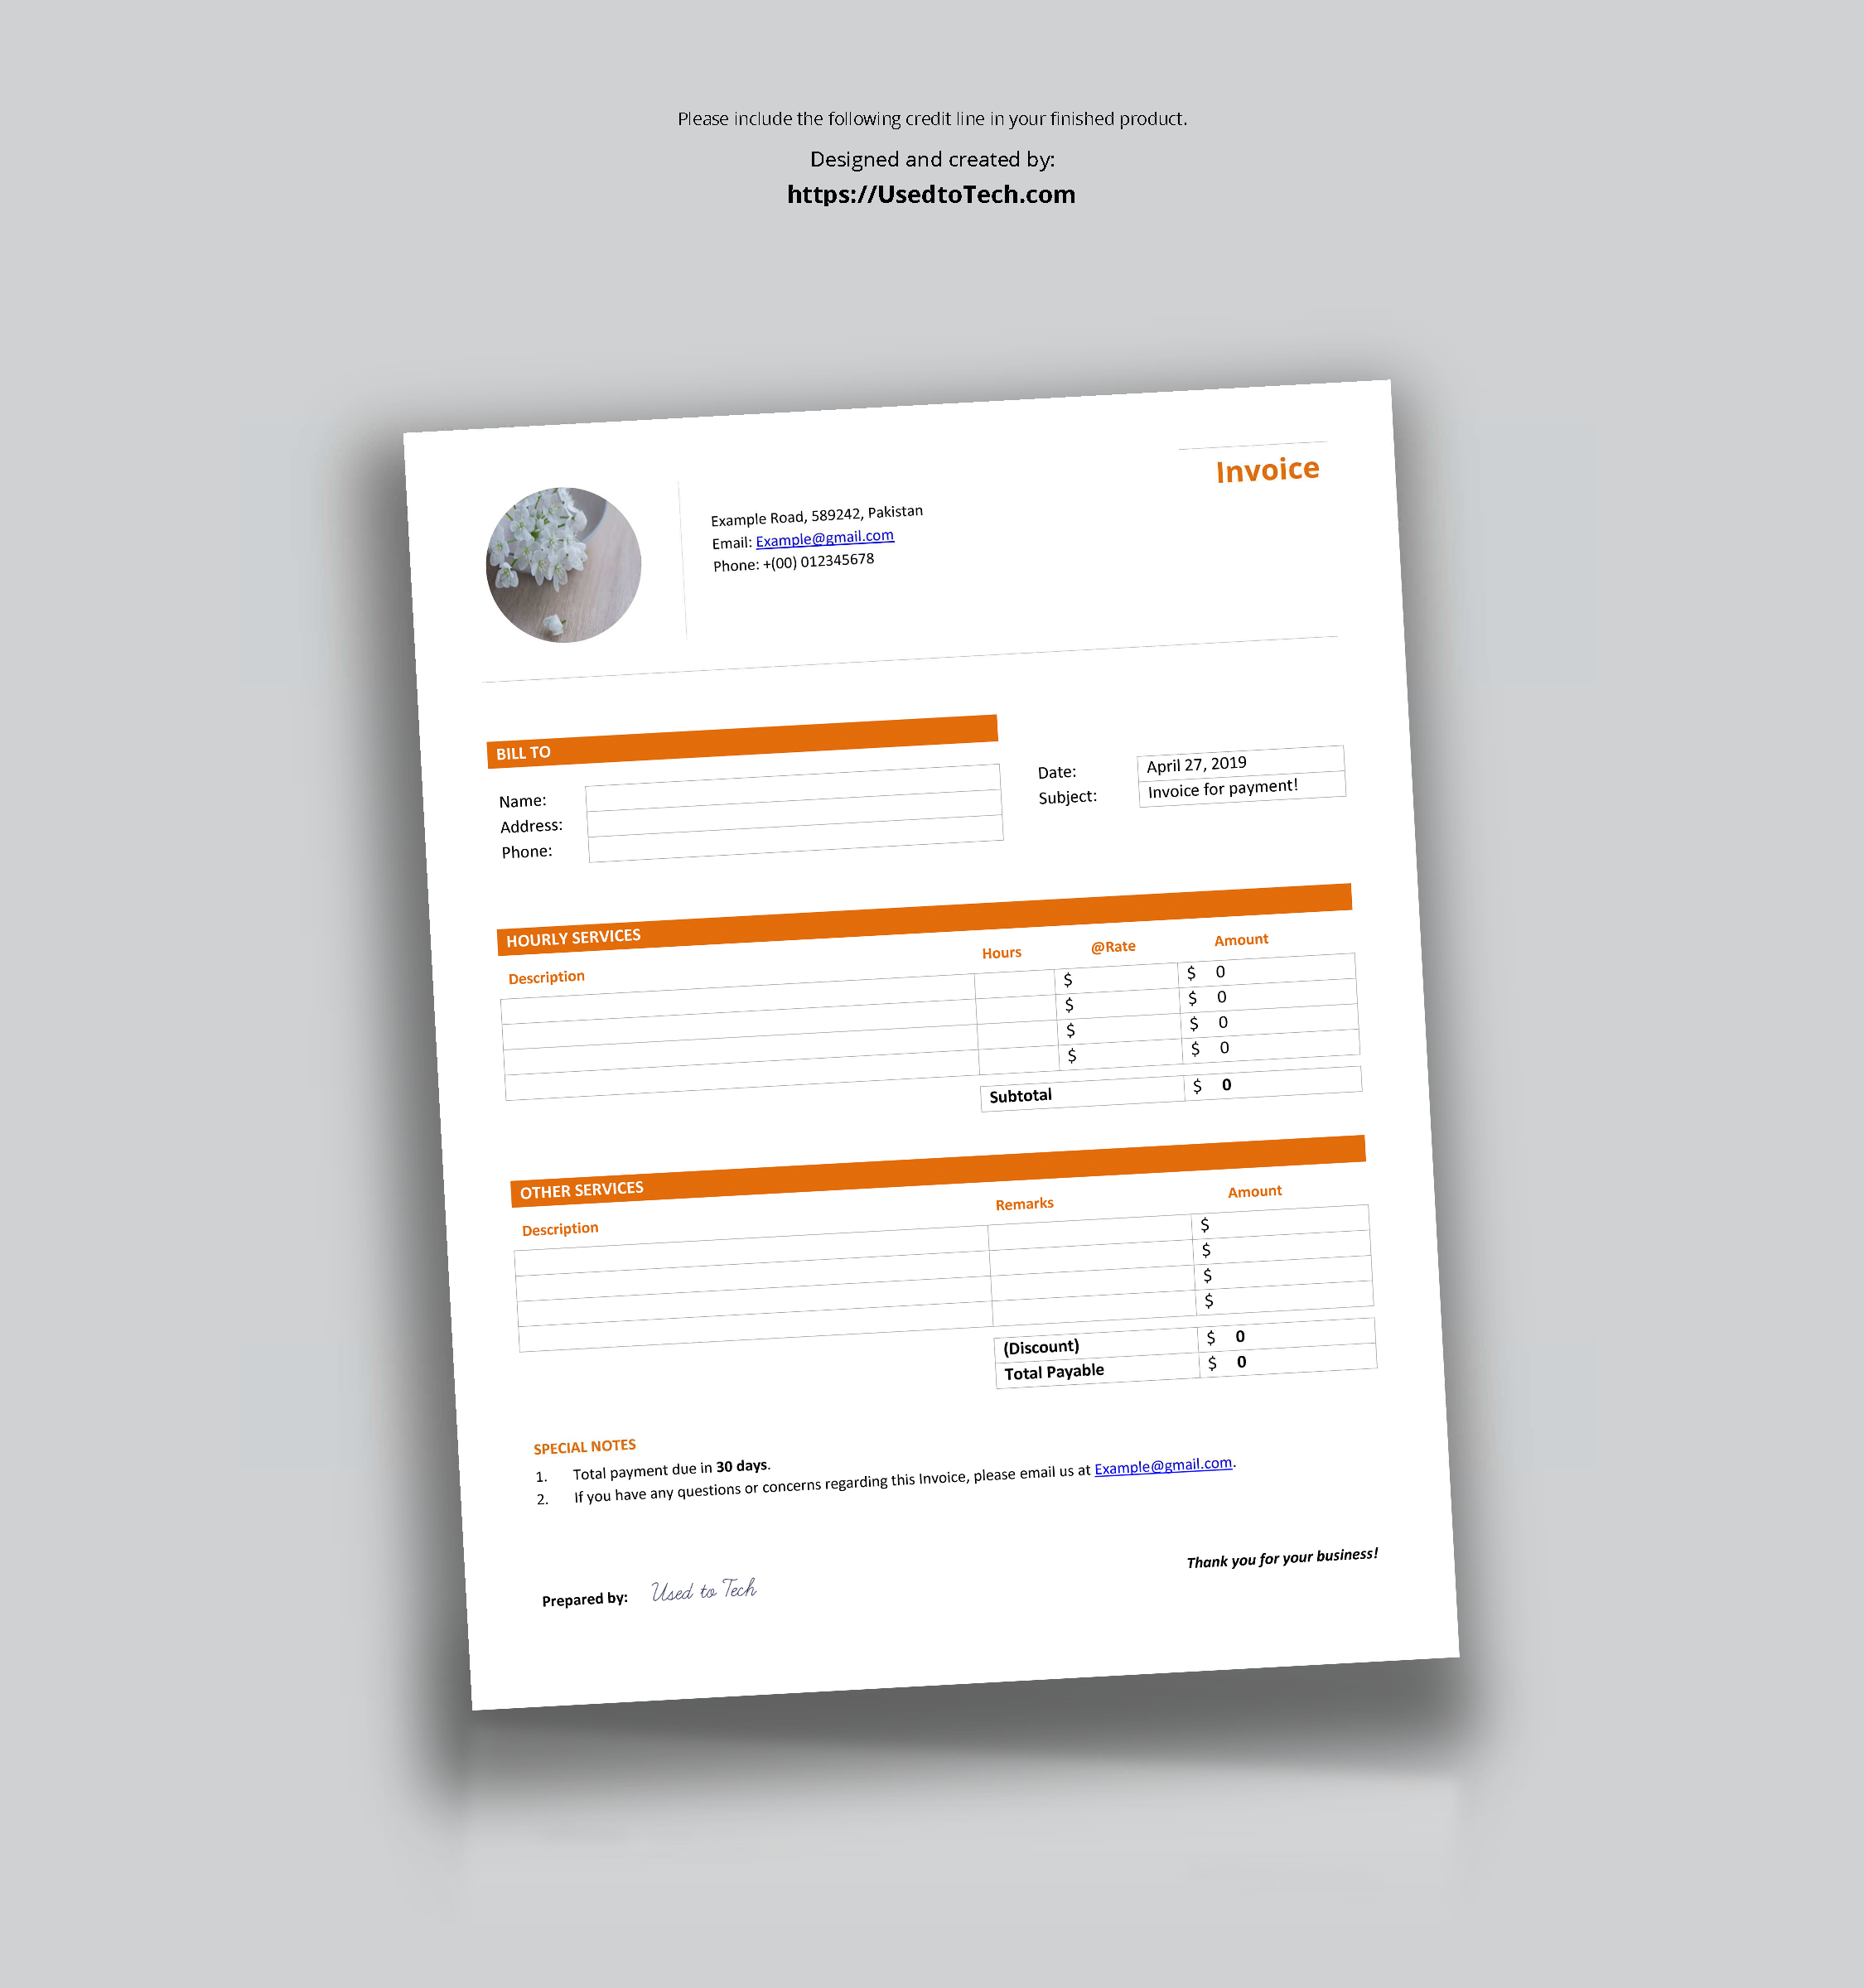 Professional Looking & Free Invoice Template In Word – Used With Regard To Header Templates For Word